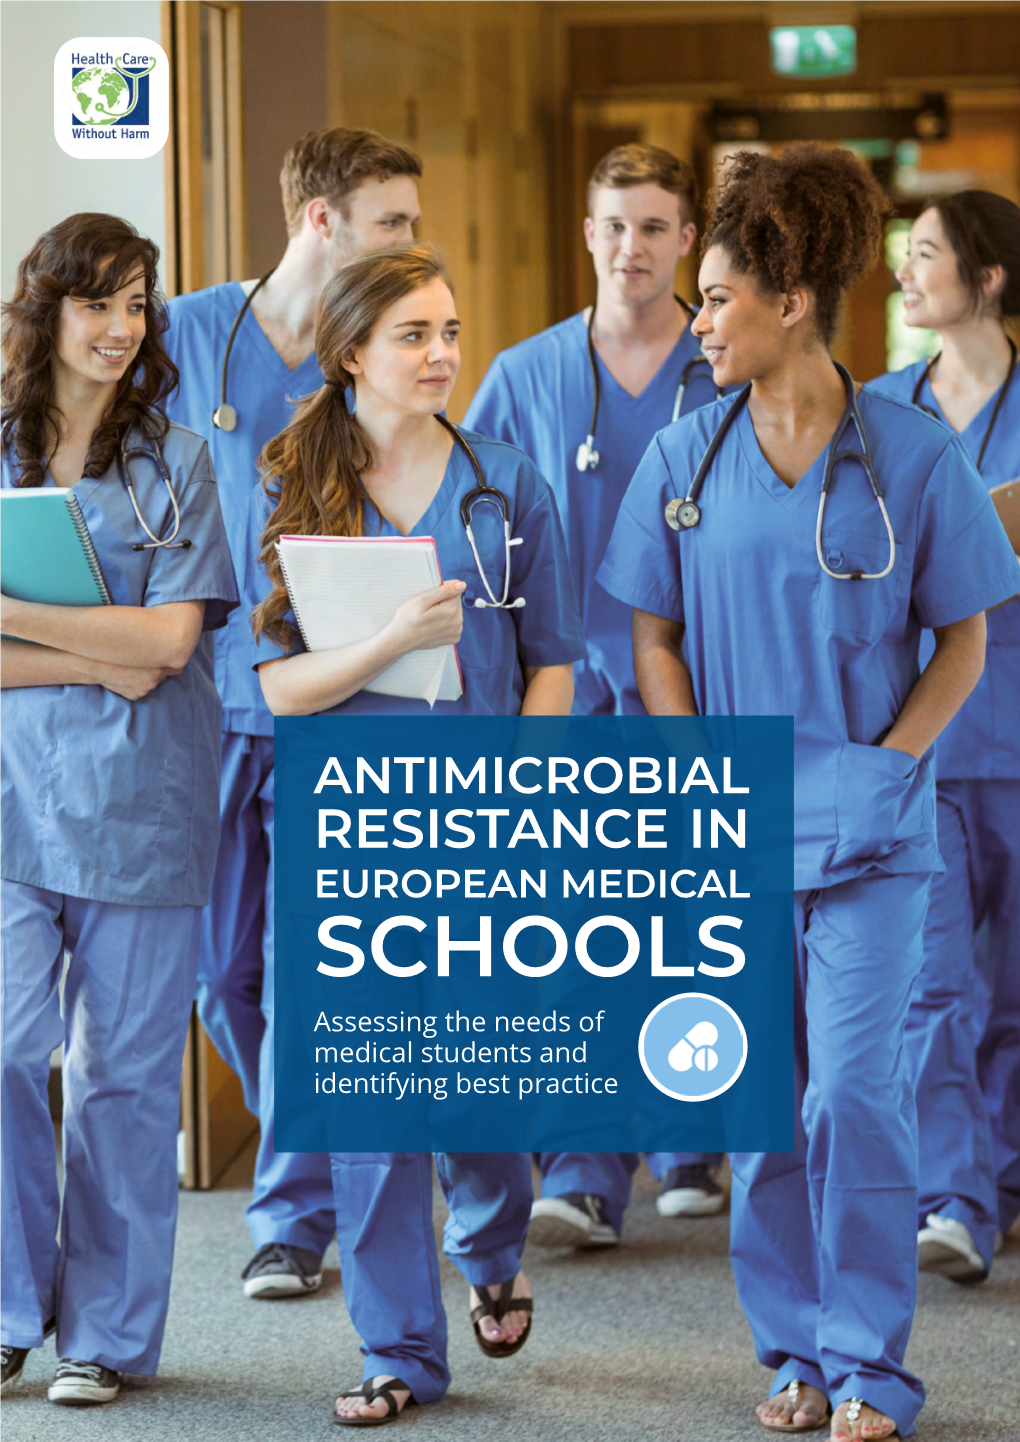 ANTIMICROBIAL RESISTANCE in EUROPEAN MEDICAL SCHOOLS Assessing the Needs of Medical Students and Identifying Best Practice INTRODUCTION